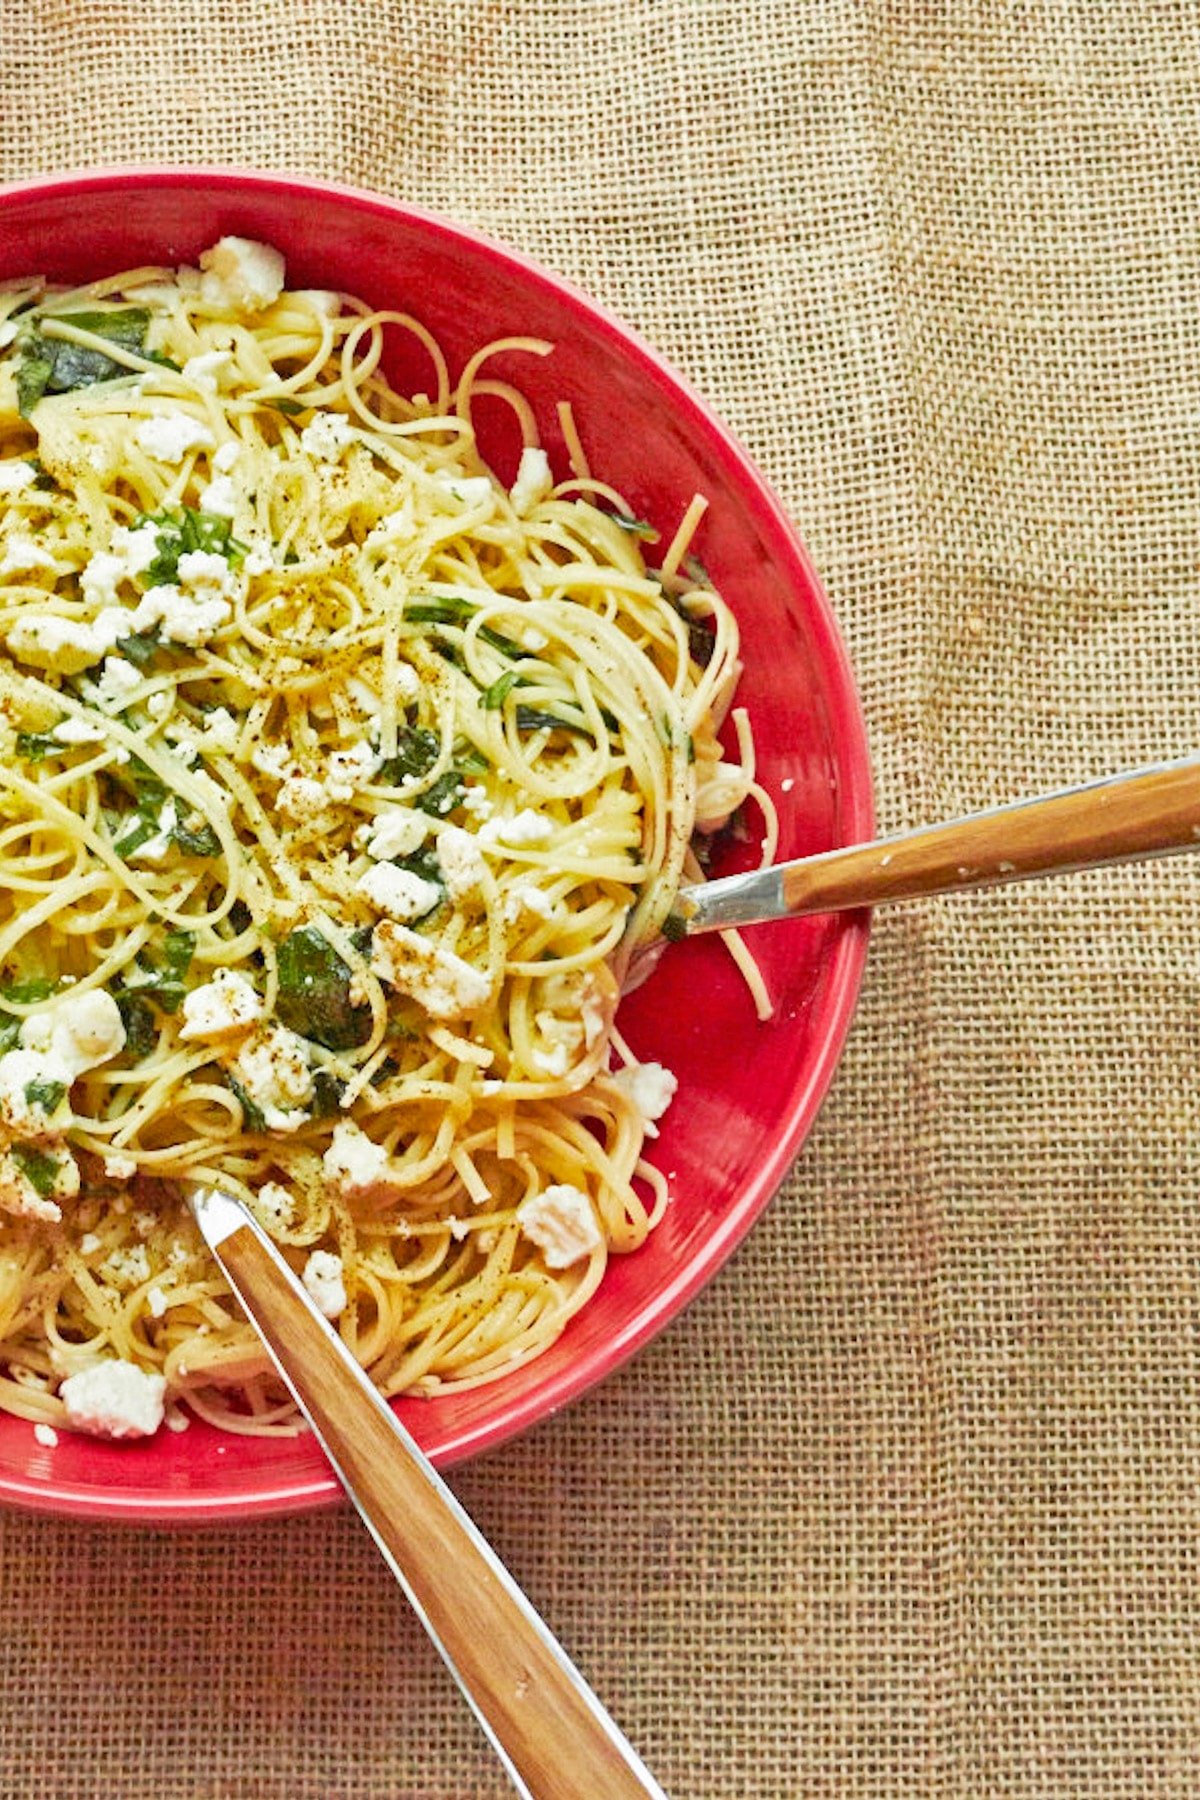 Linguine with Lemon, Feta and Basil in red bowl on burlap-covered table.